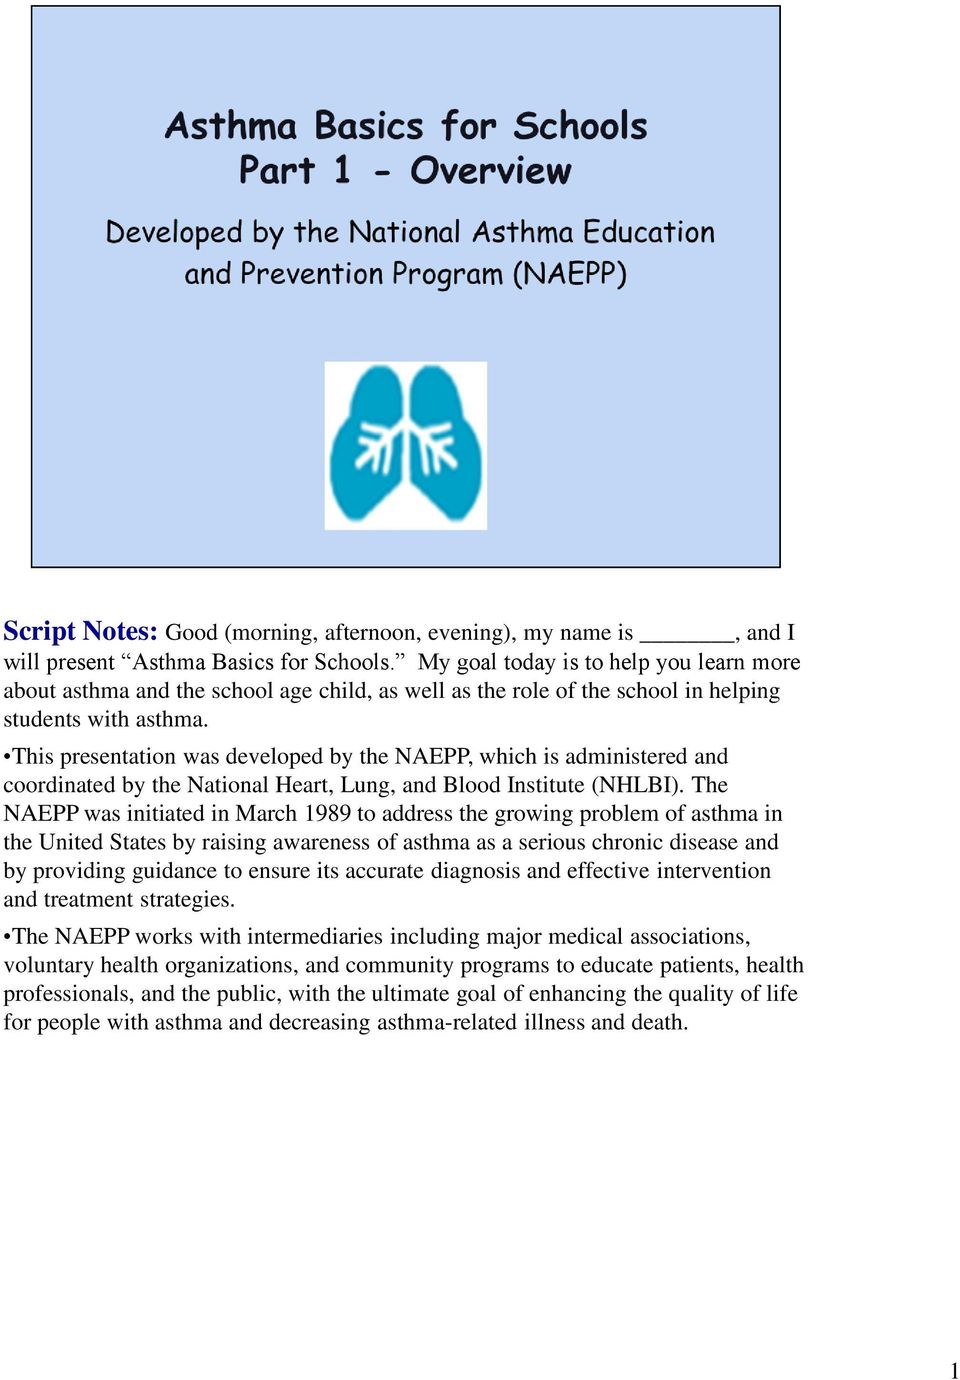 This presentation was developed by the NAEPP, which is administered and coordinated by the National Heart, Lung, and Blood Institute (NHLBI).